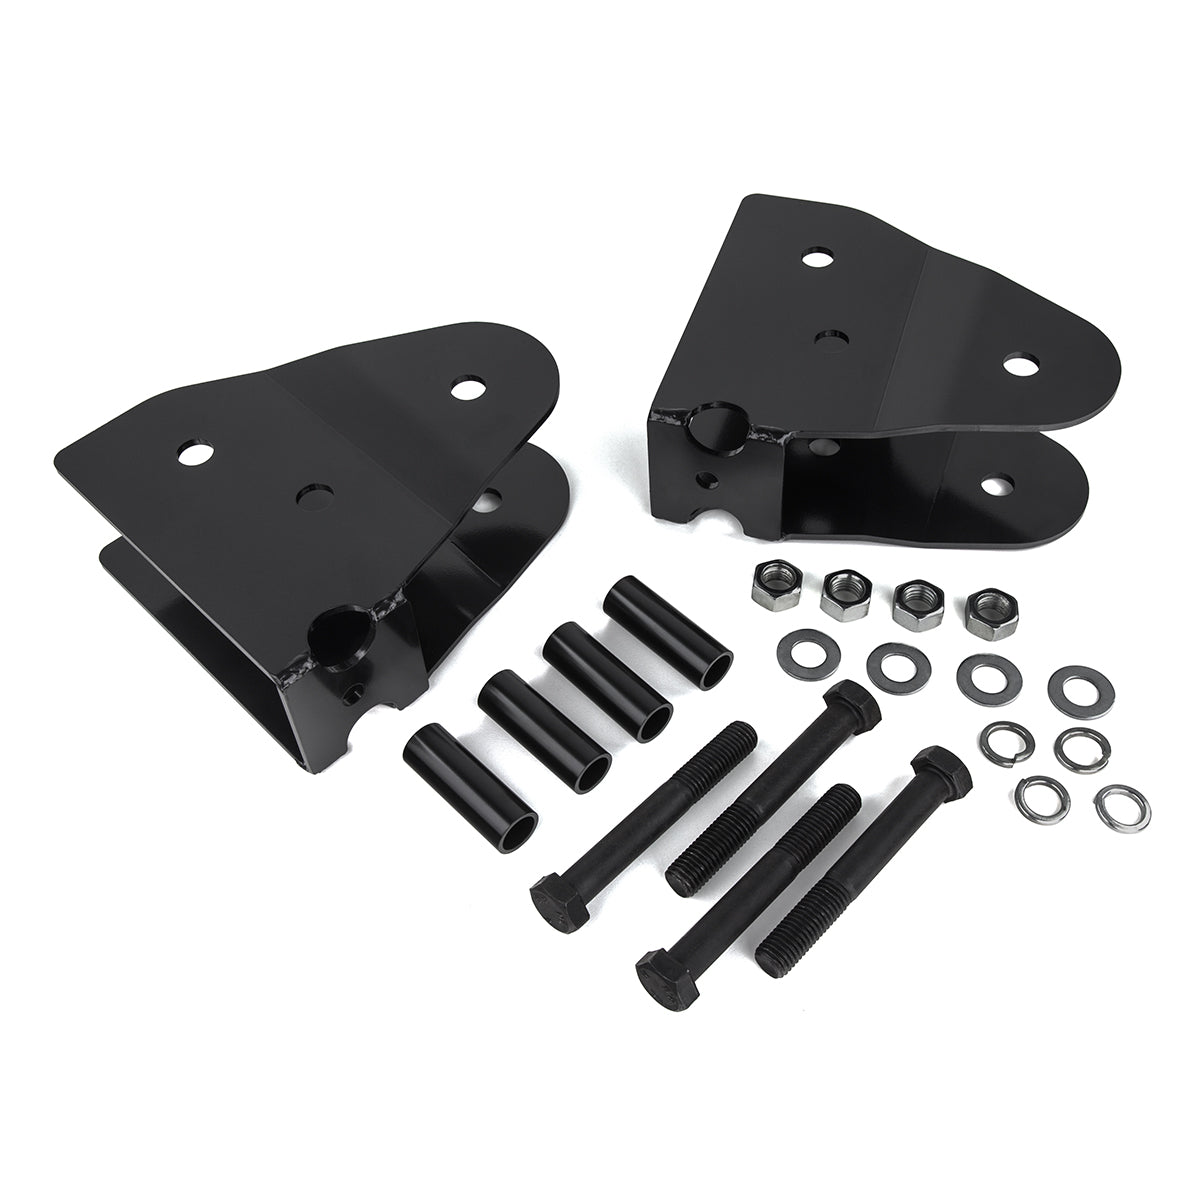 2005-2016 Ford F-250 Full Lift Kit with Front Shock Extender and Radius Arm Drop Brackets